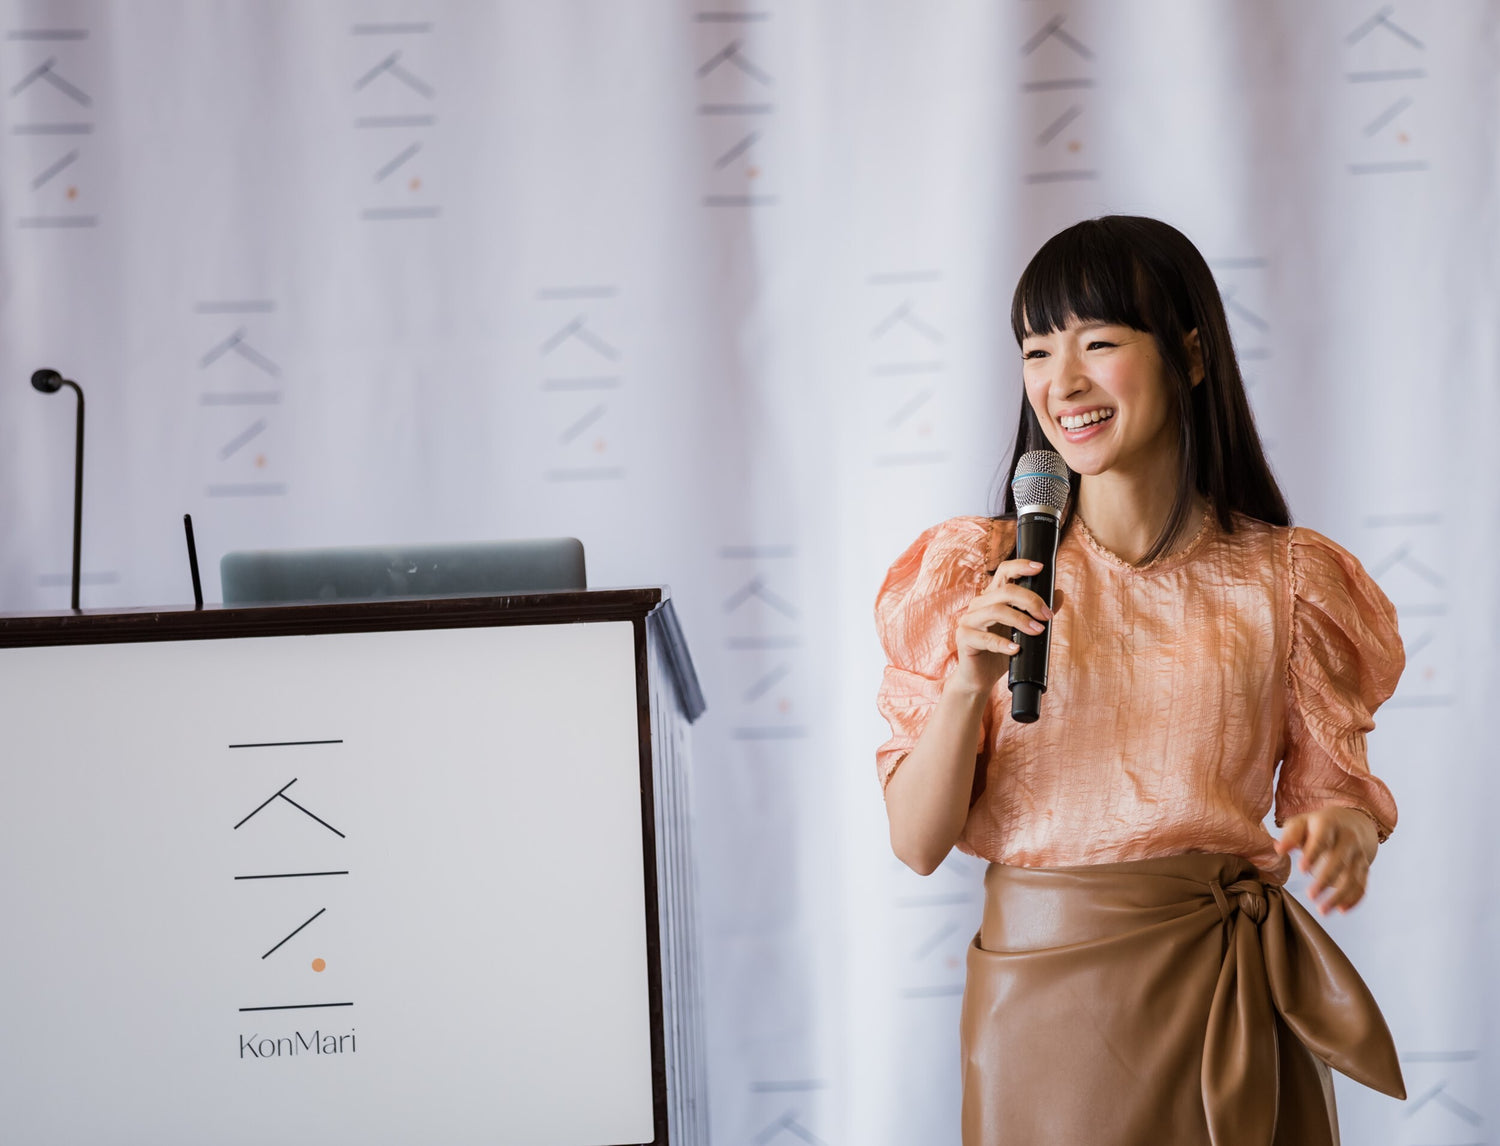 Marie Kondo speaking at an event